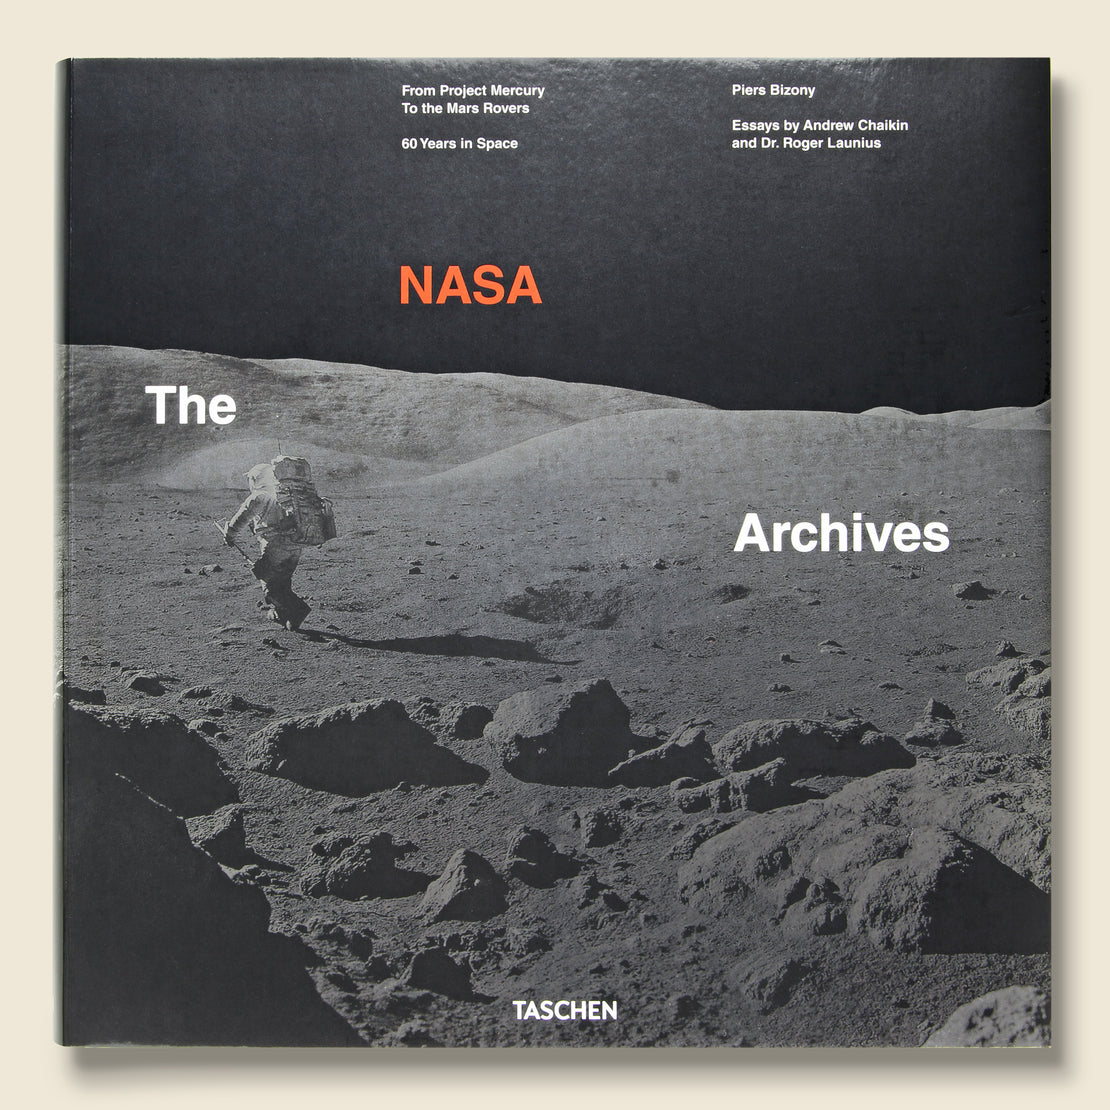 Bookstore The NASA Archives: 60 Years in Space (Gold Edition)